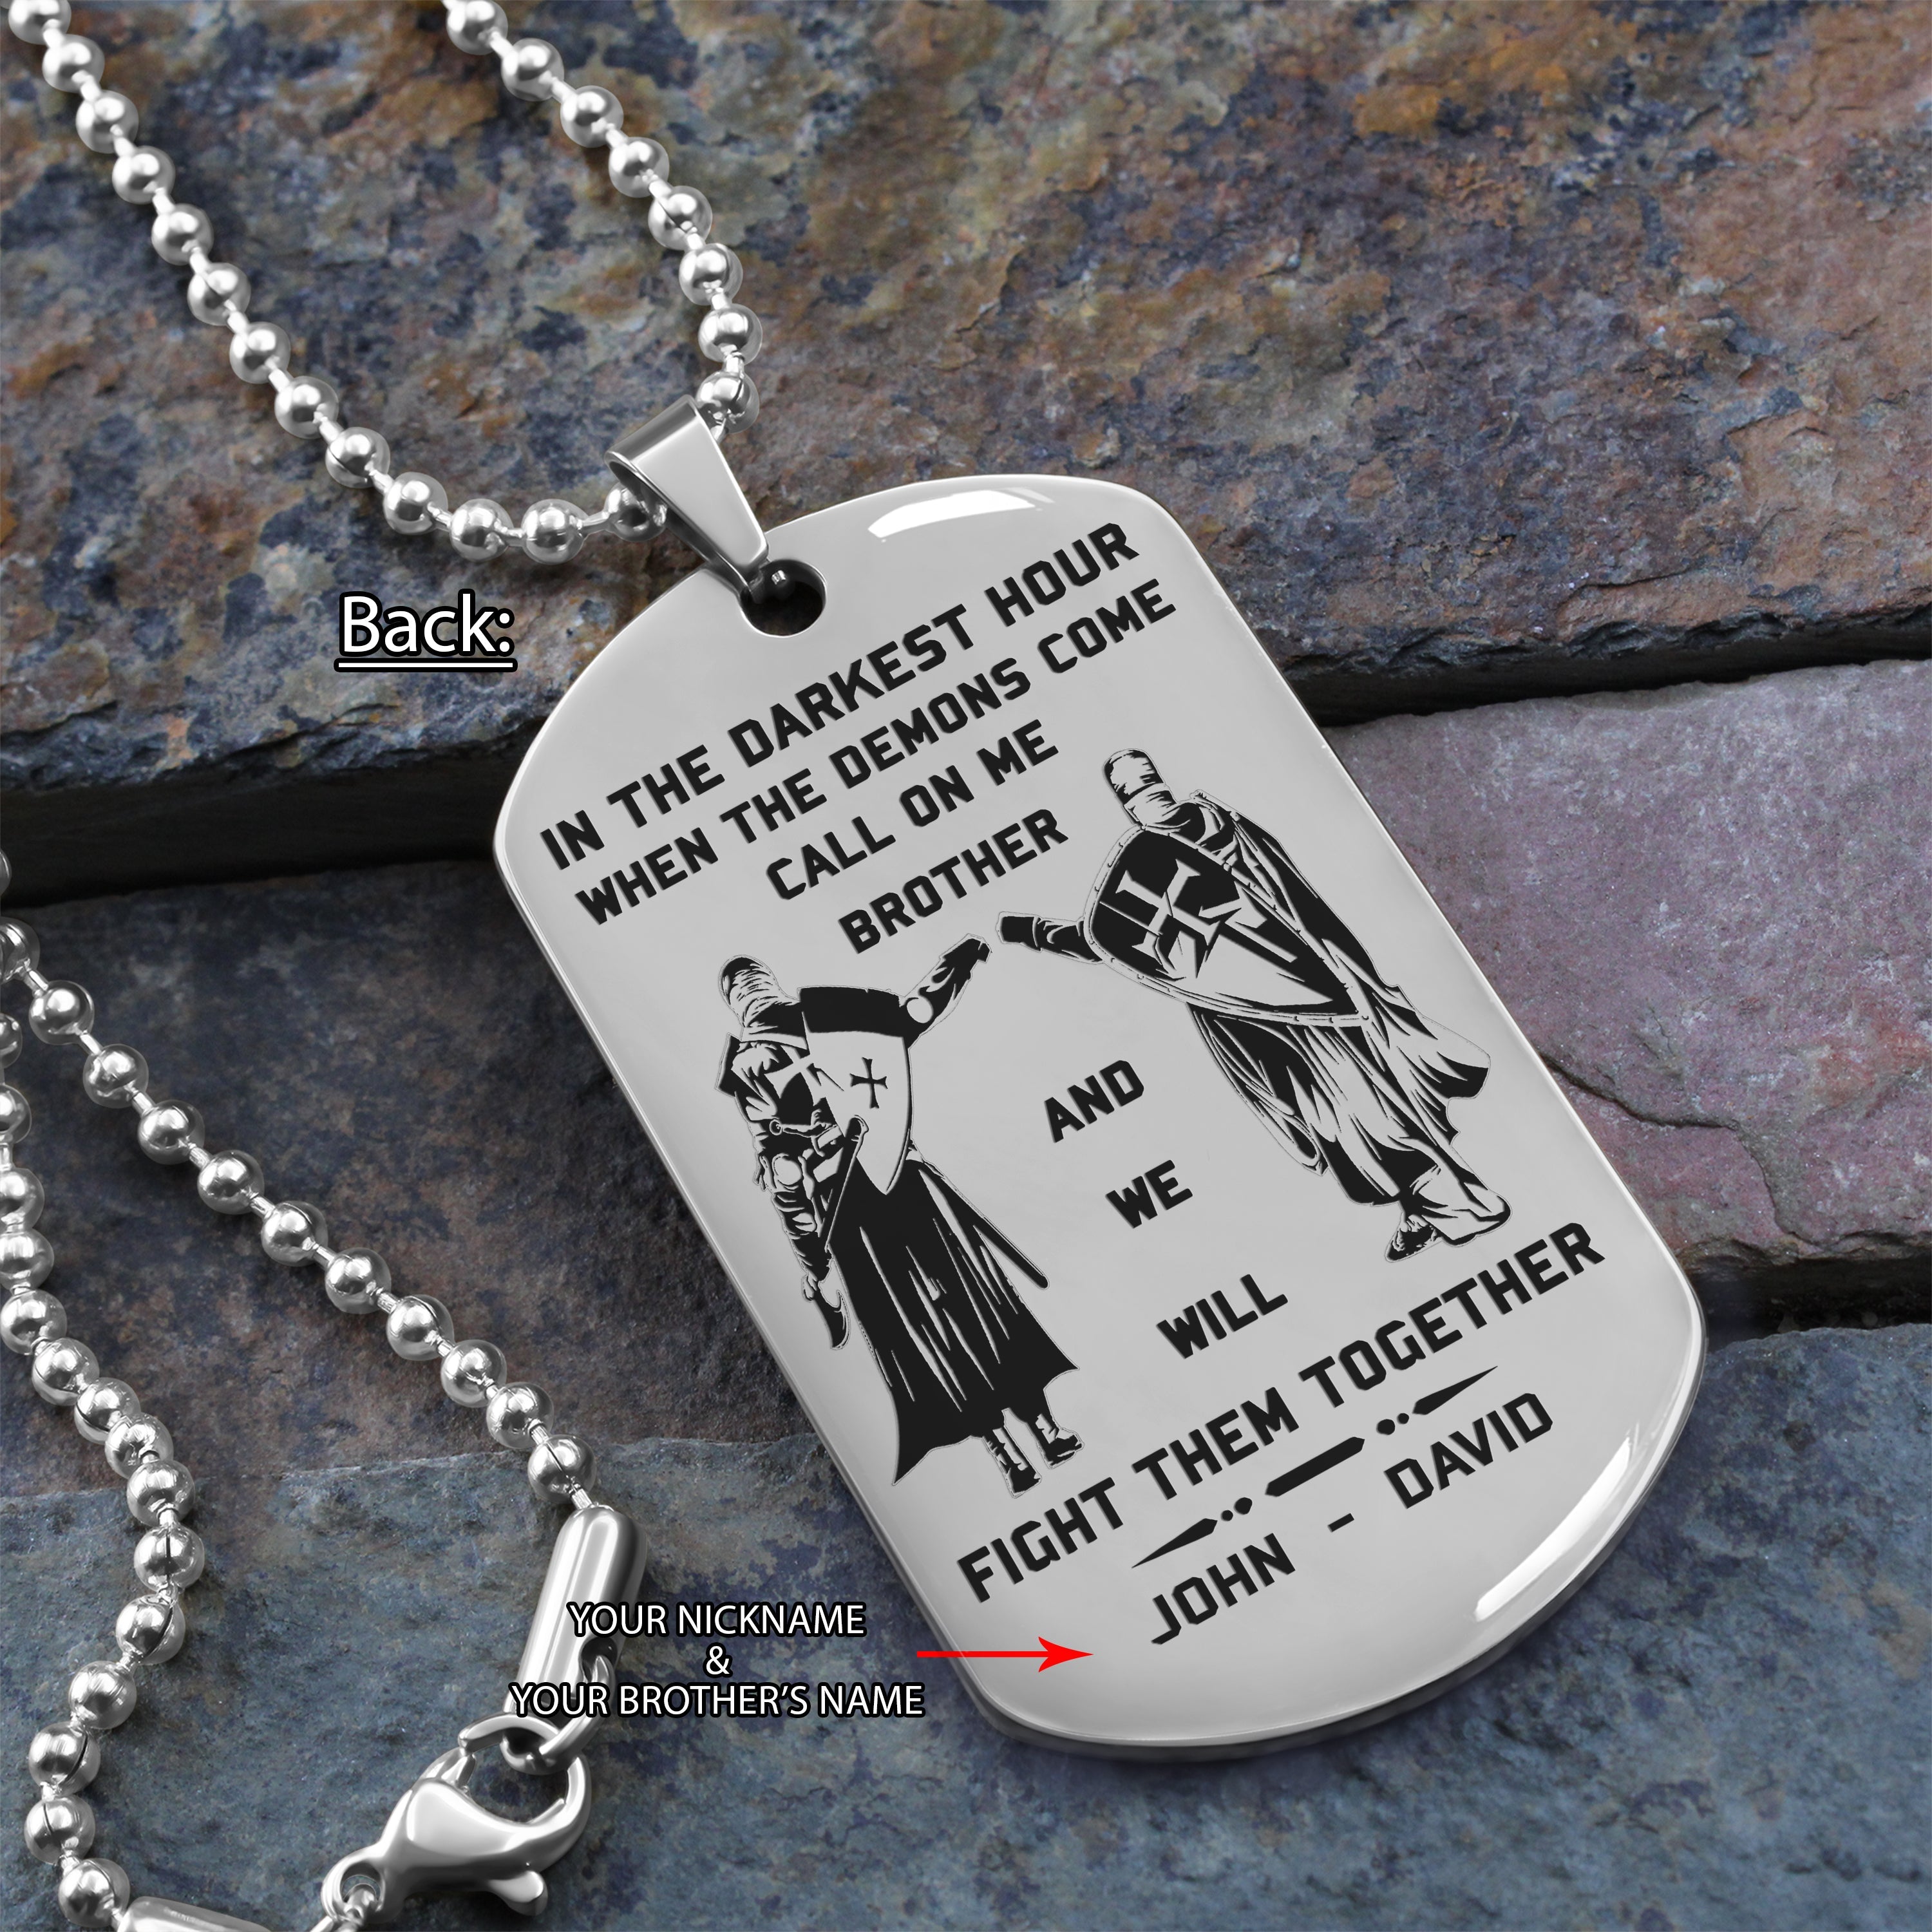 Customizable engraved brother dog tag gift from brother, In the darkest hour, When the demons come call on me brother and we will fight them together